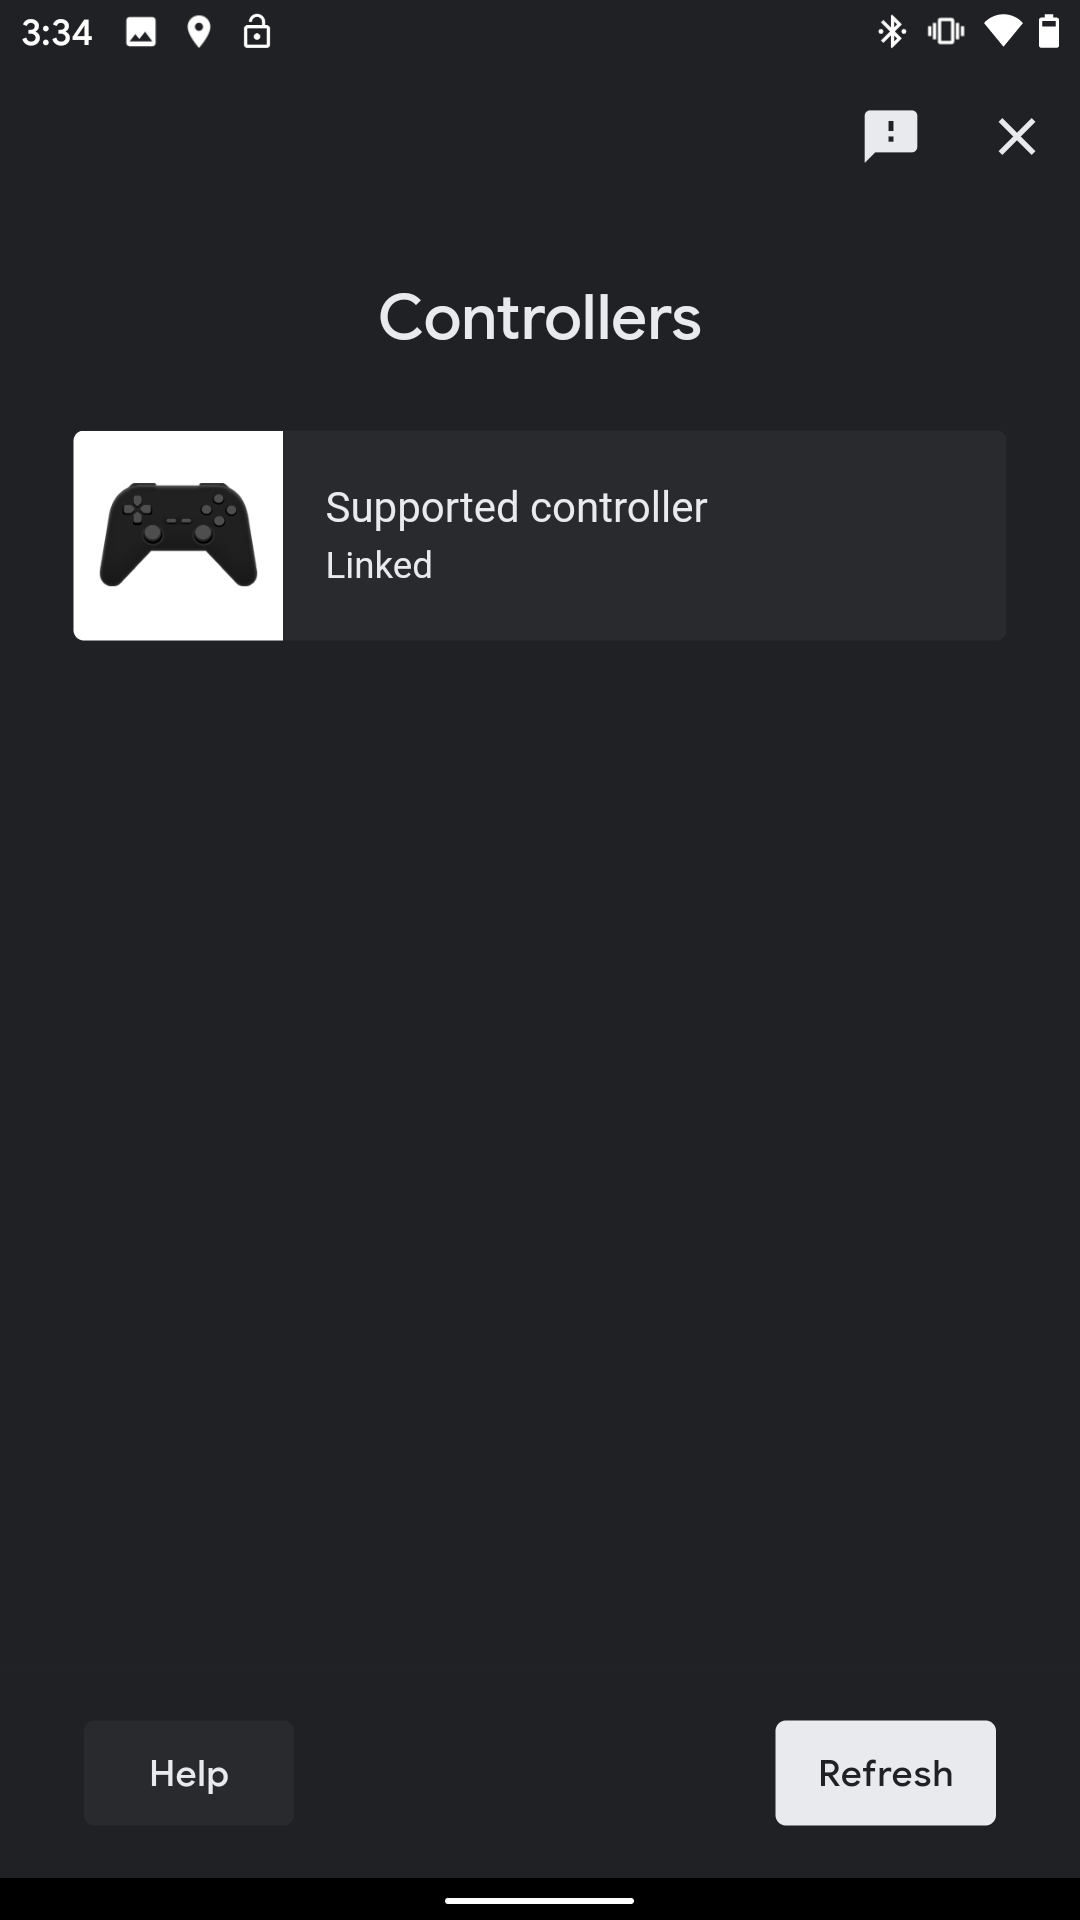 Pairing an Xbox One controller for Stadia